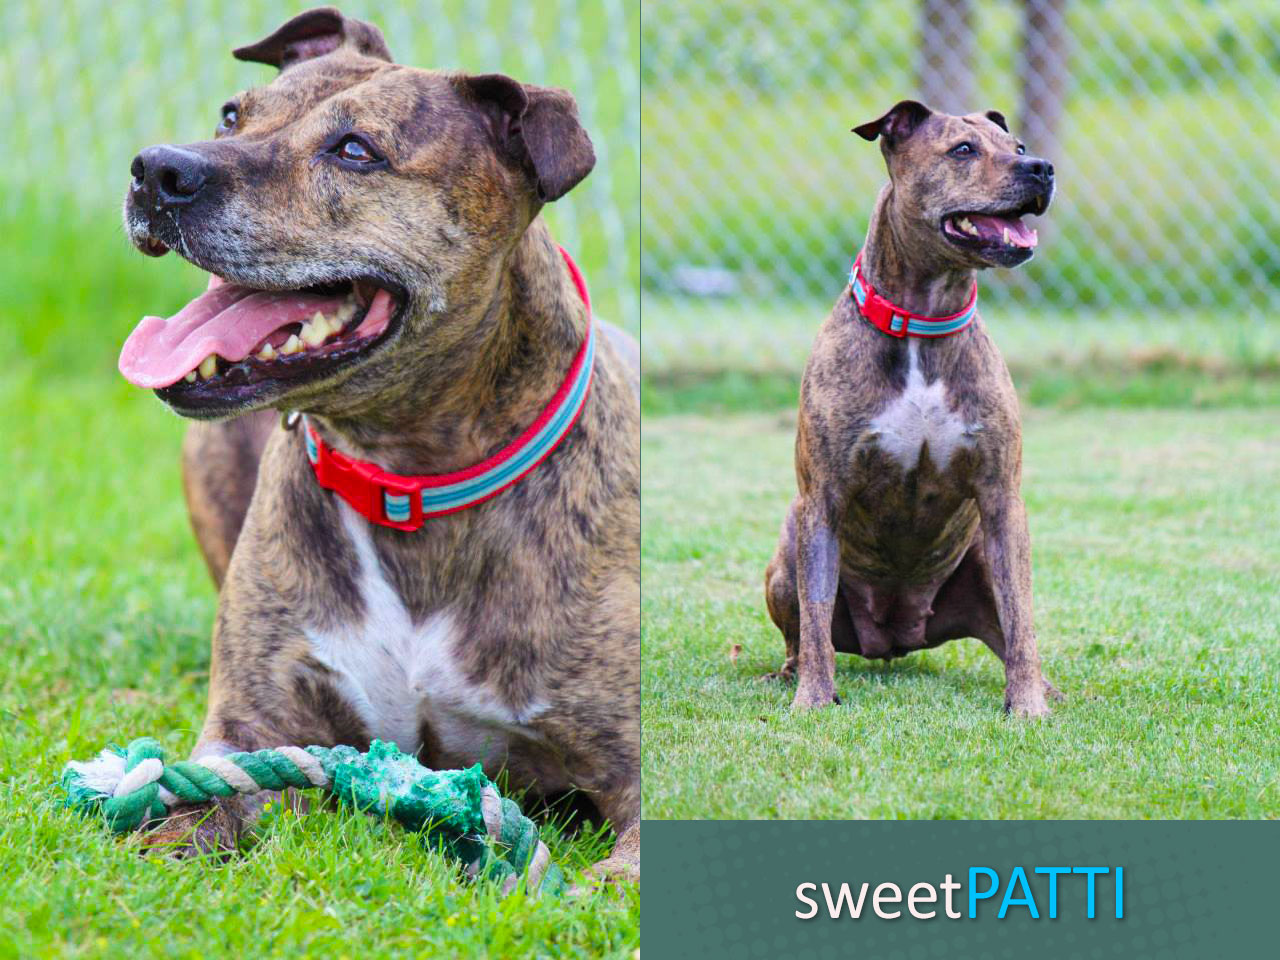 Sweet Patti is still looking for a home